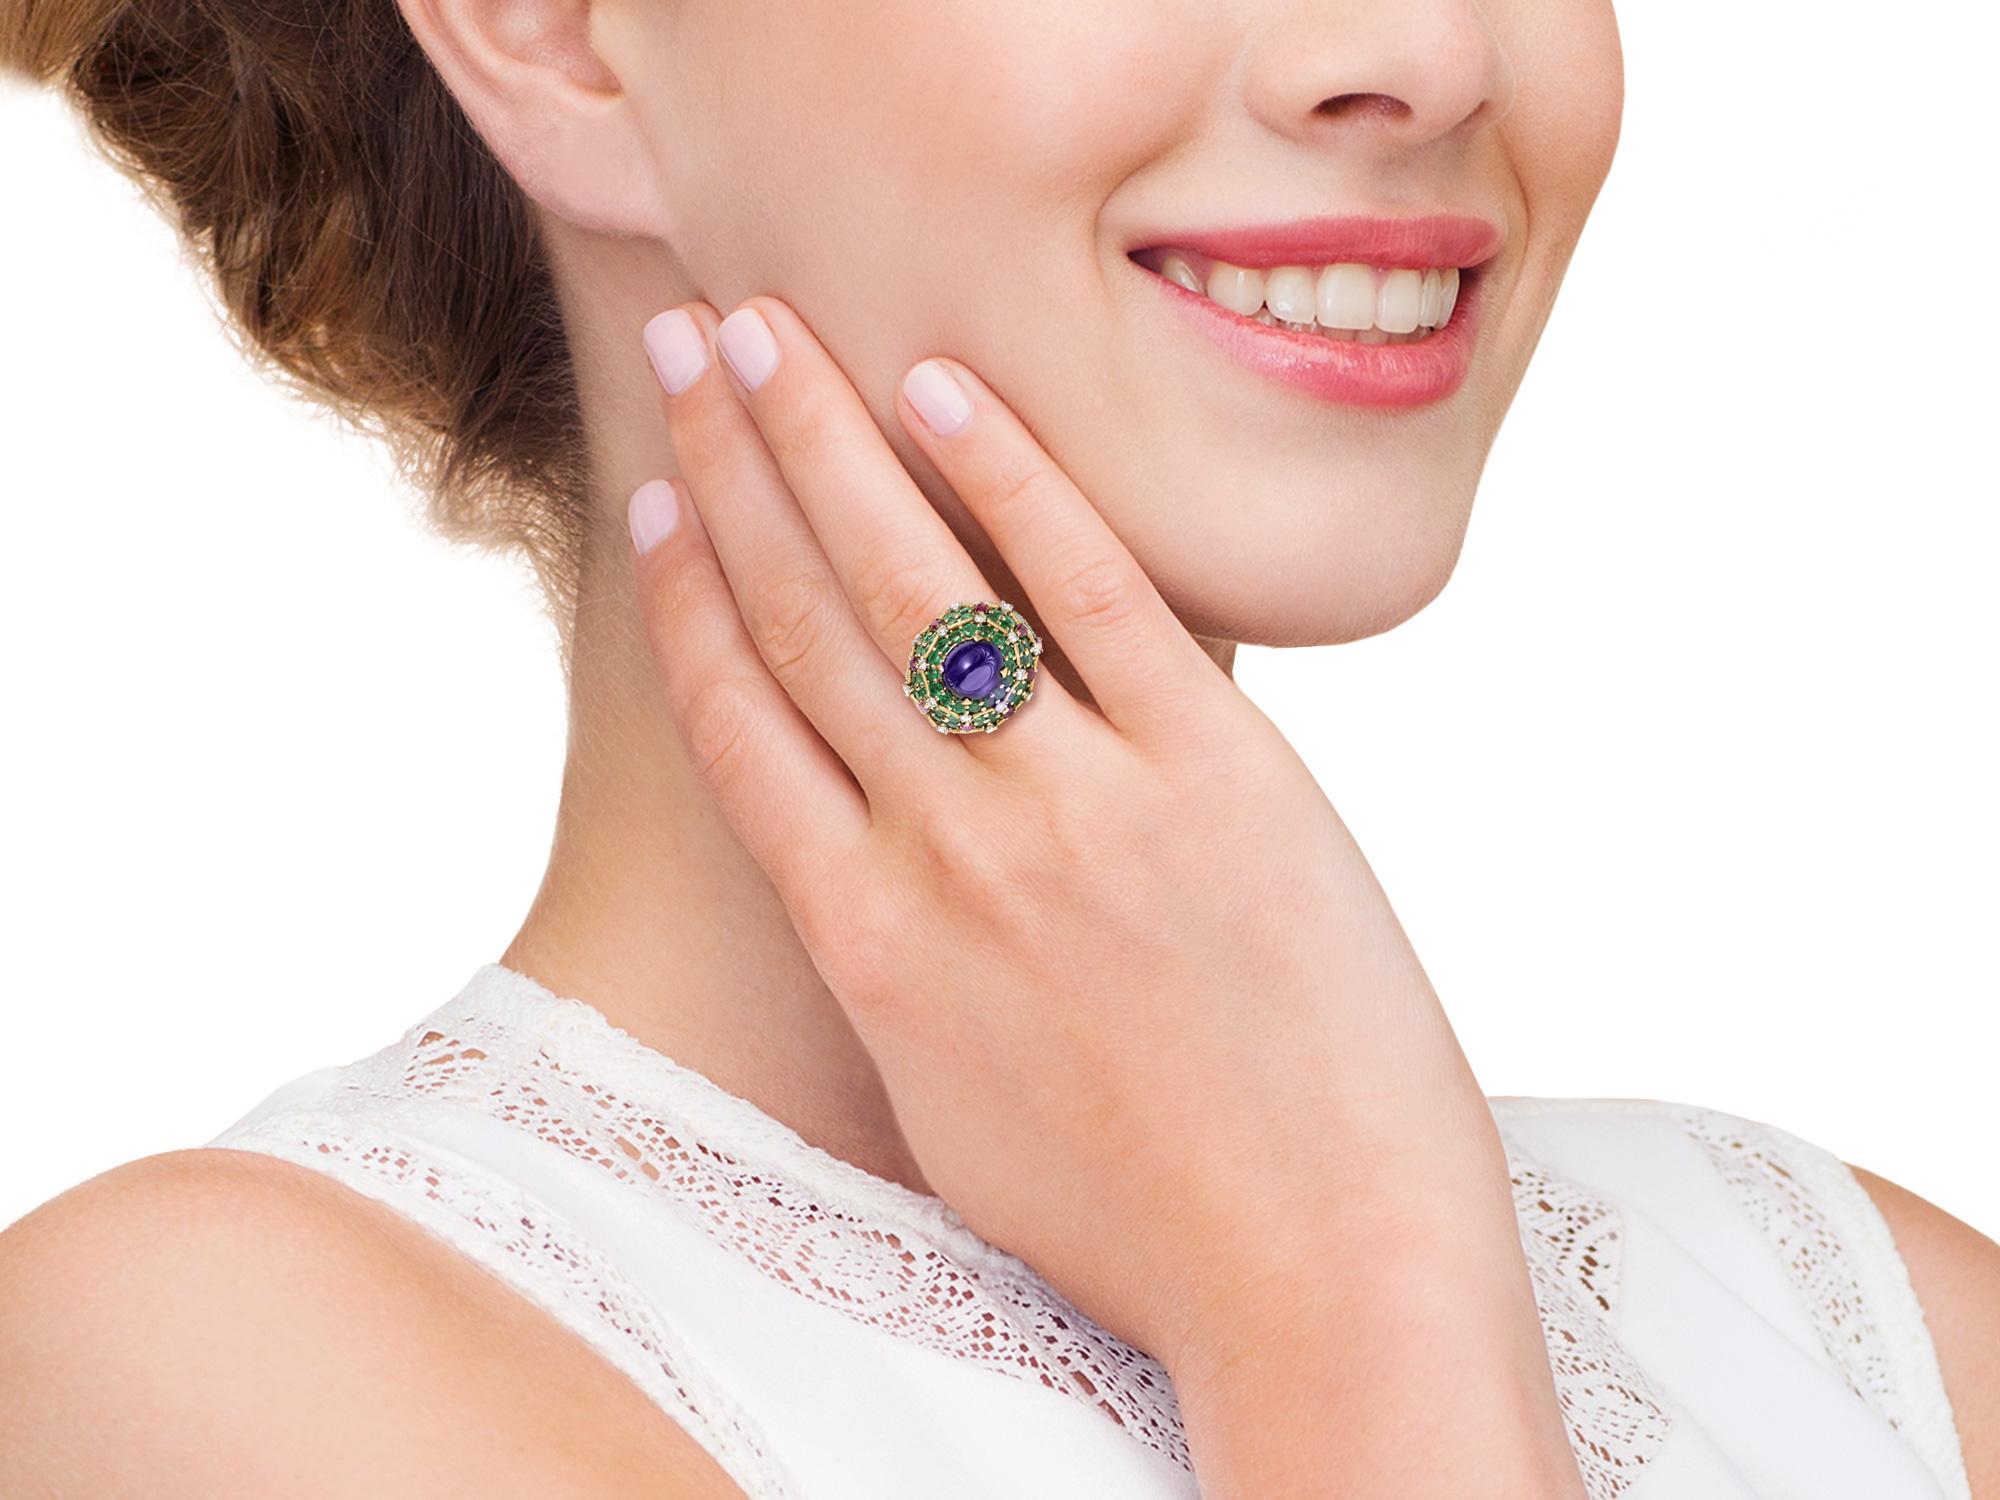 Marchak Paris Dome Ring with a center cabochon amethyst surrounded with emeralds, rubies and diamonds mounted in 18k yellow gold.  Signed Marchak Paris, no. 33426